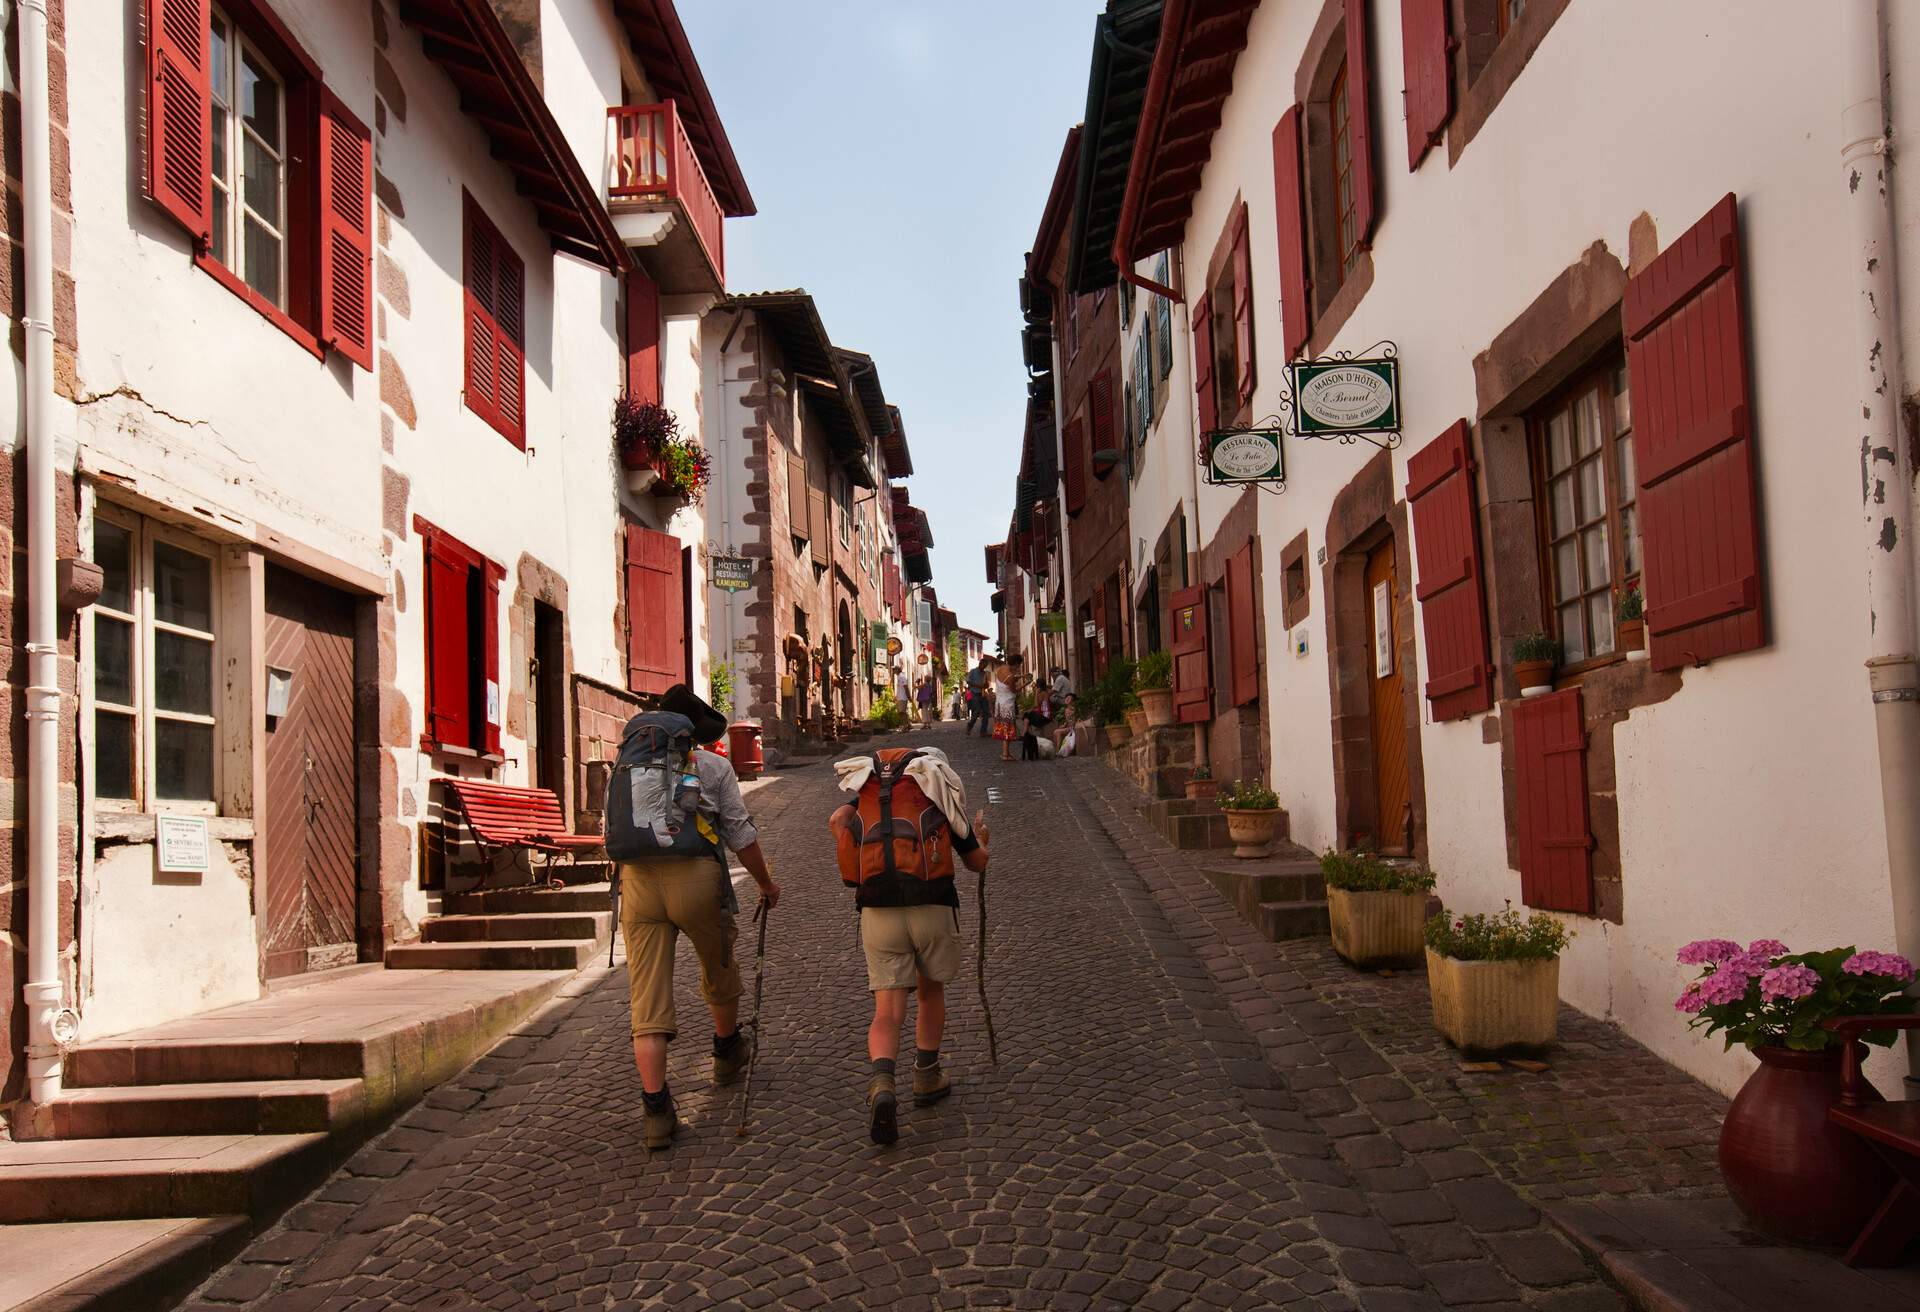 Two people with rucksacks and trekking poles walk along cobbled streets lined with old traditional houses with red windows.